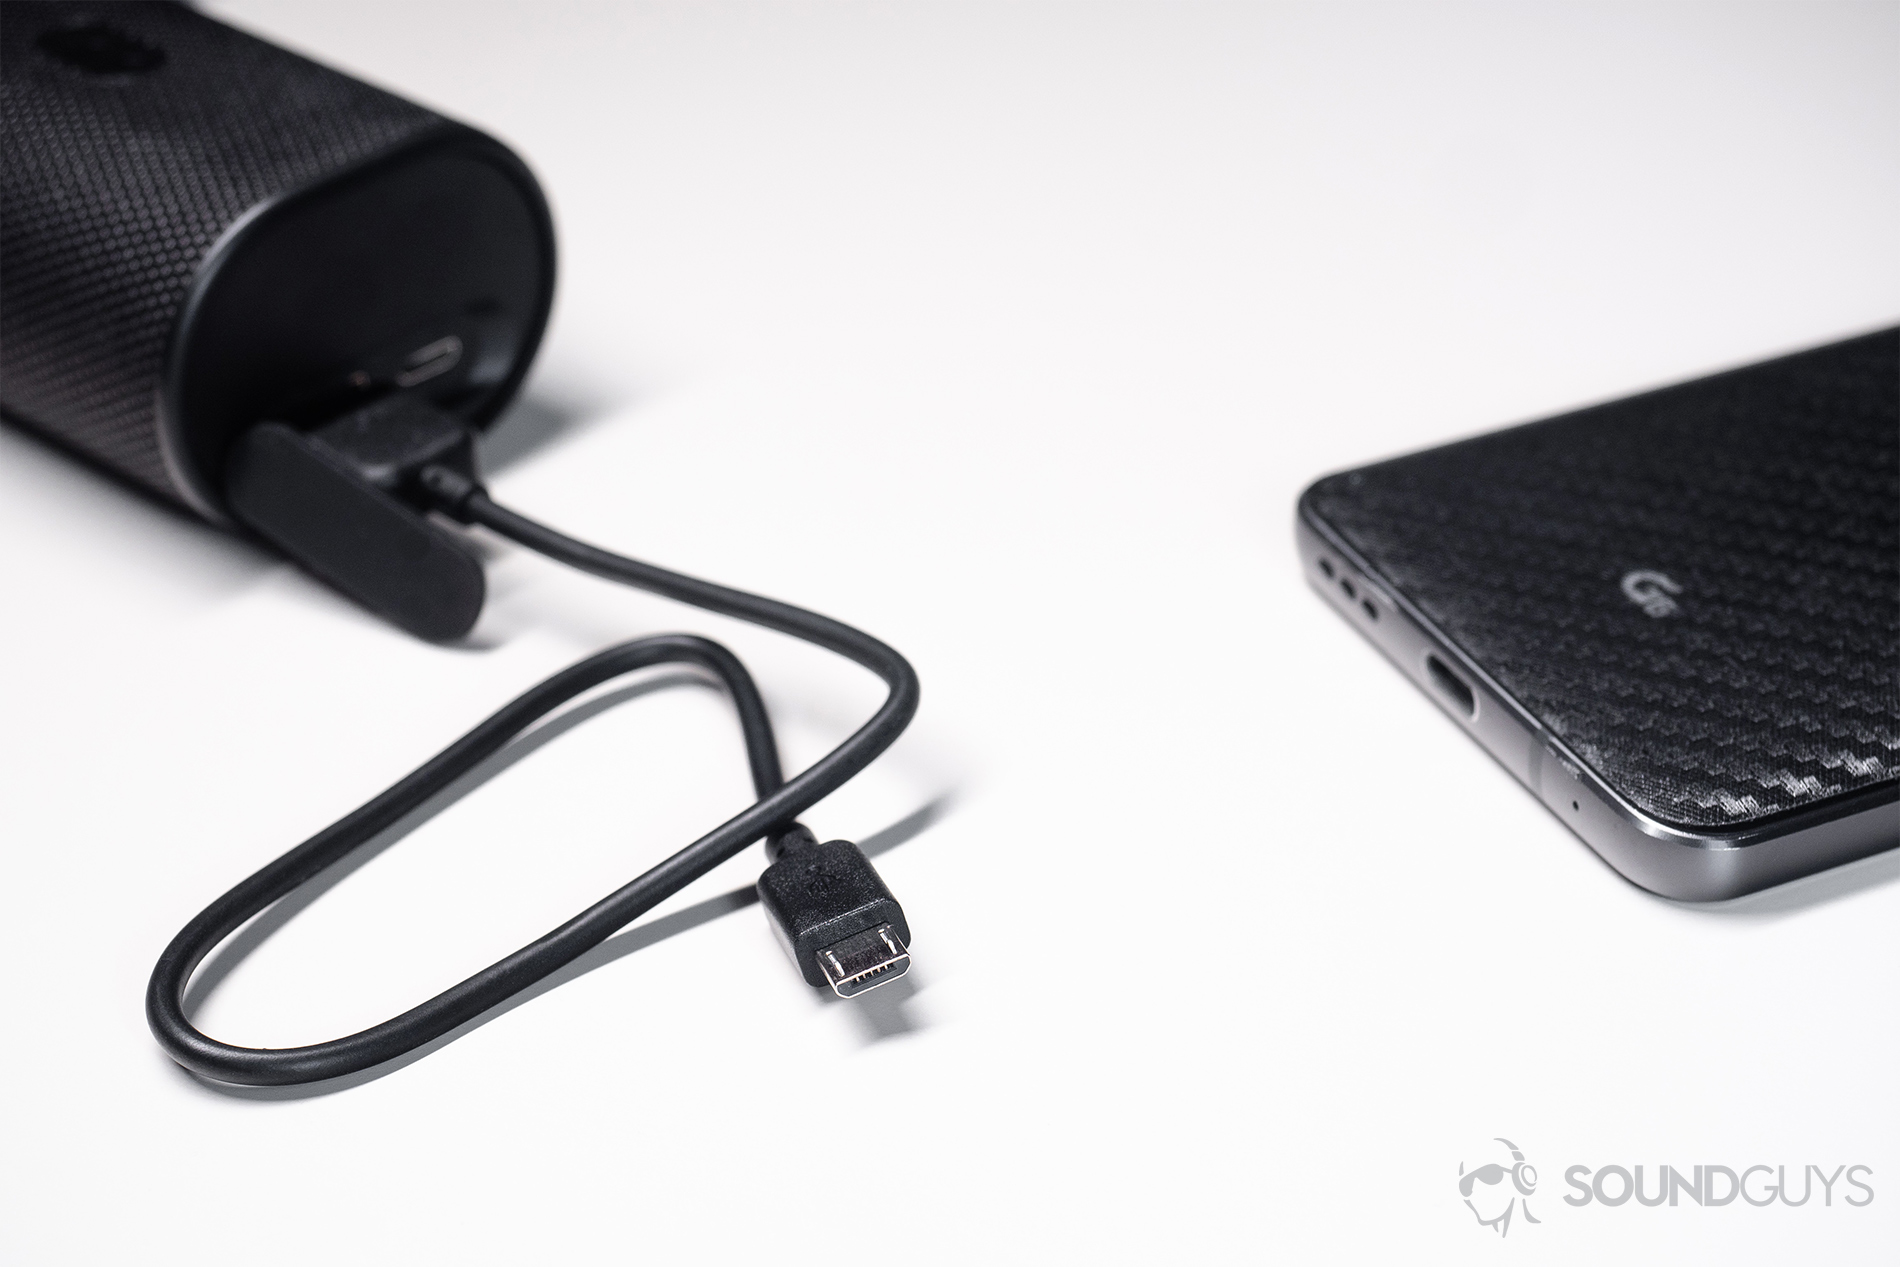 Jam Live True: The included micro-USB cable connected to the charging case unable to charge the USB-C LG G6.